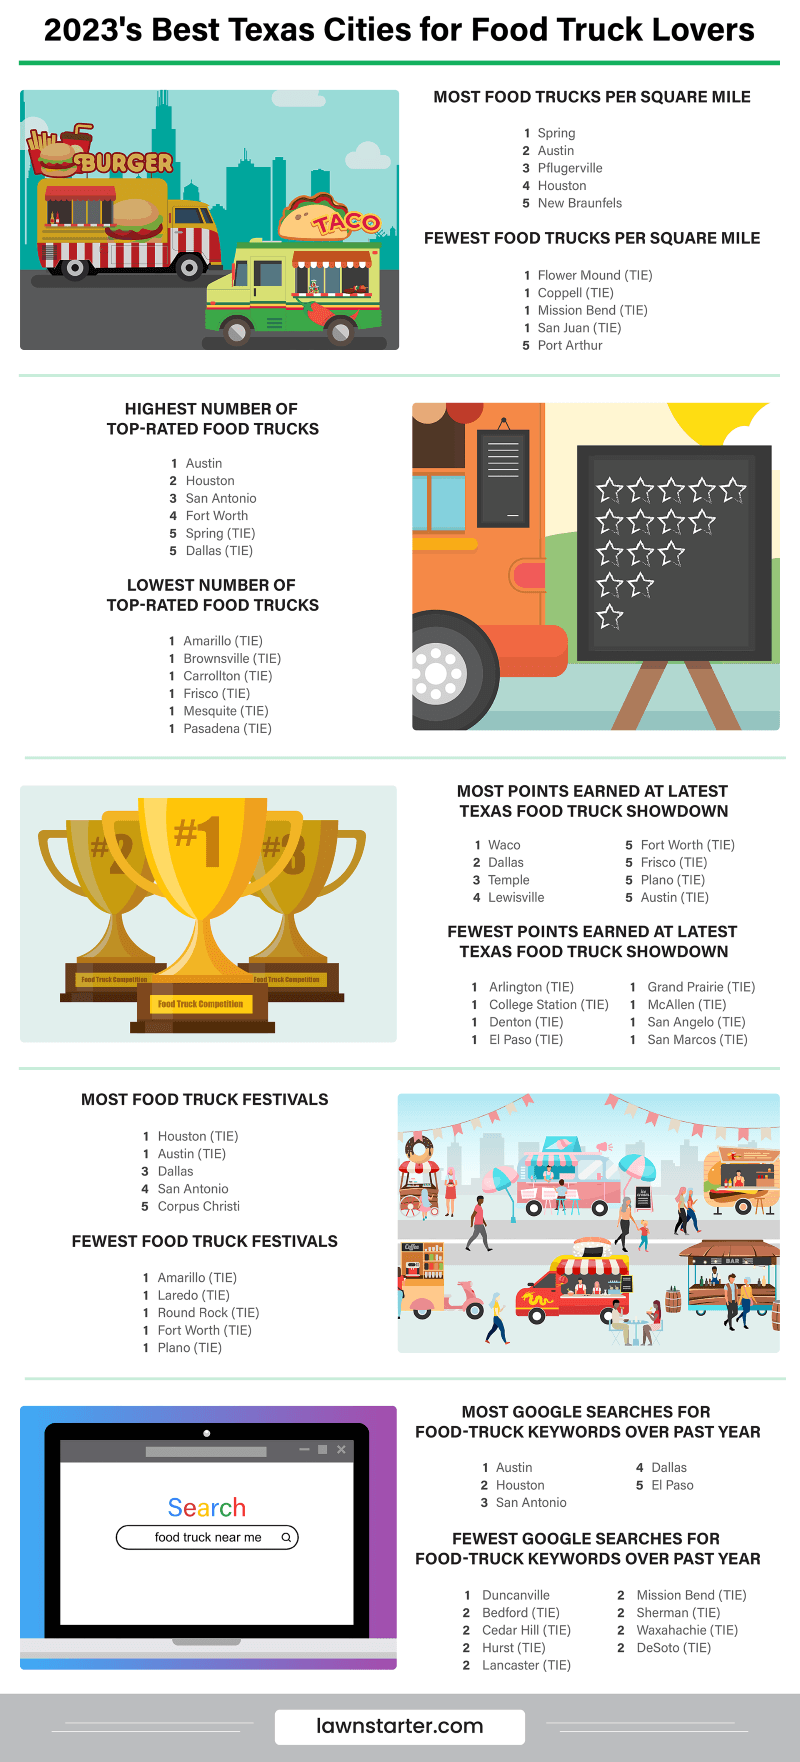 Infographic showing the Best Texas Cities for Food Truck Lovers, a ranking based on access to and popularity of food trucks, consumer satisfaction, and competition awards